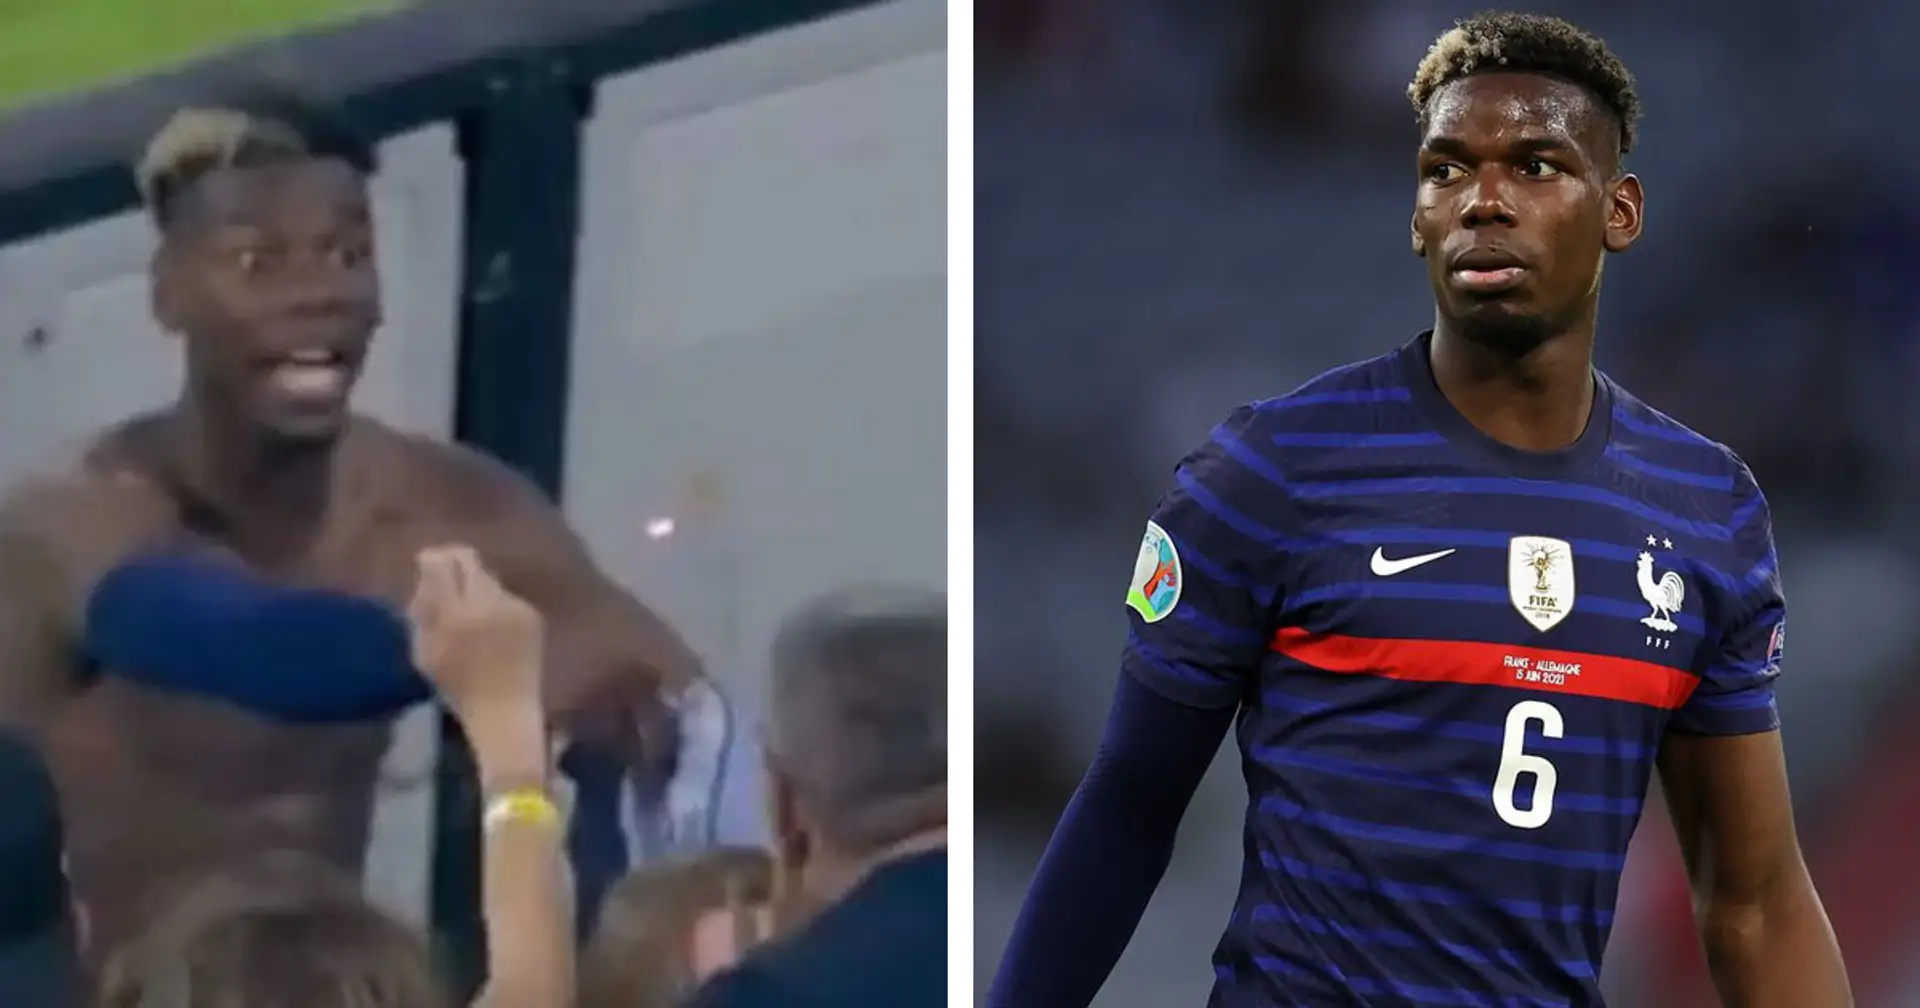 Explained: Why Pogba could be punished for post-game activity after Germany win